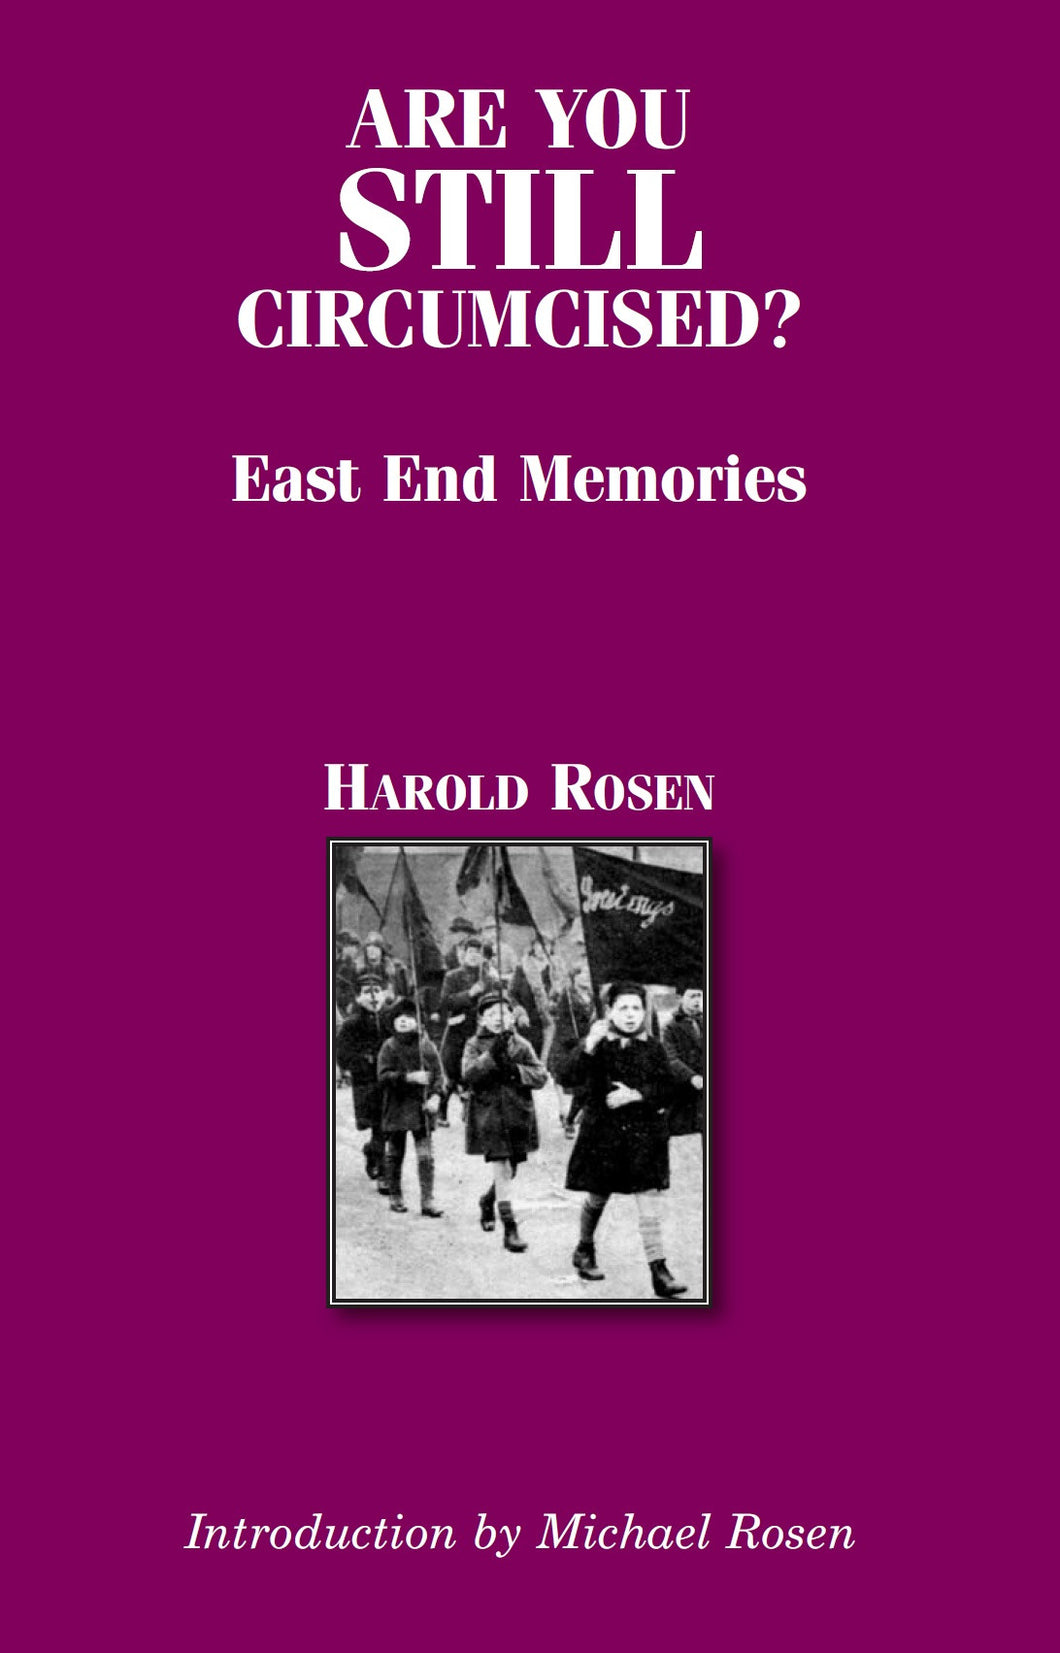 Are You Still Circumcised? East End Memories